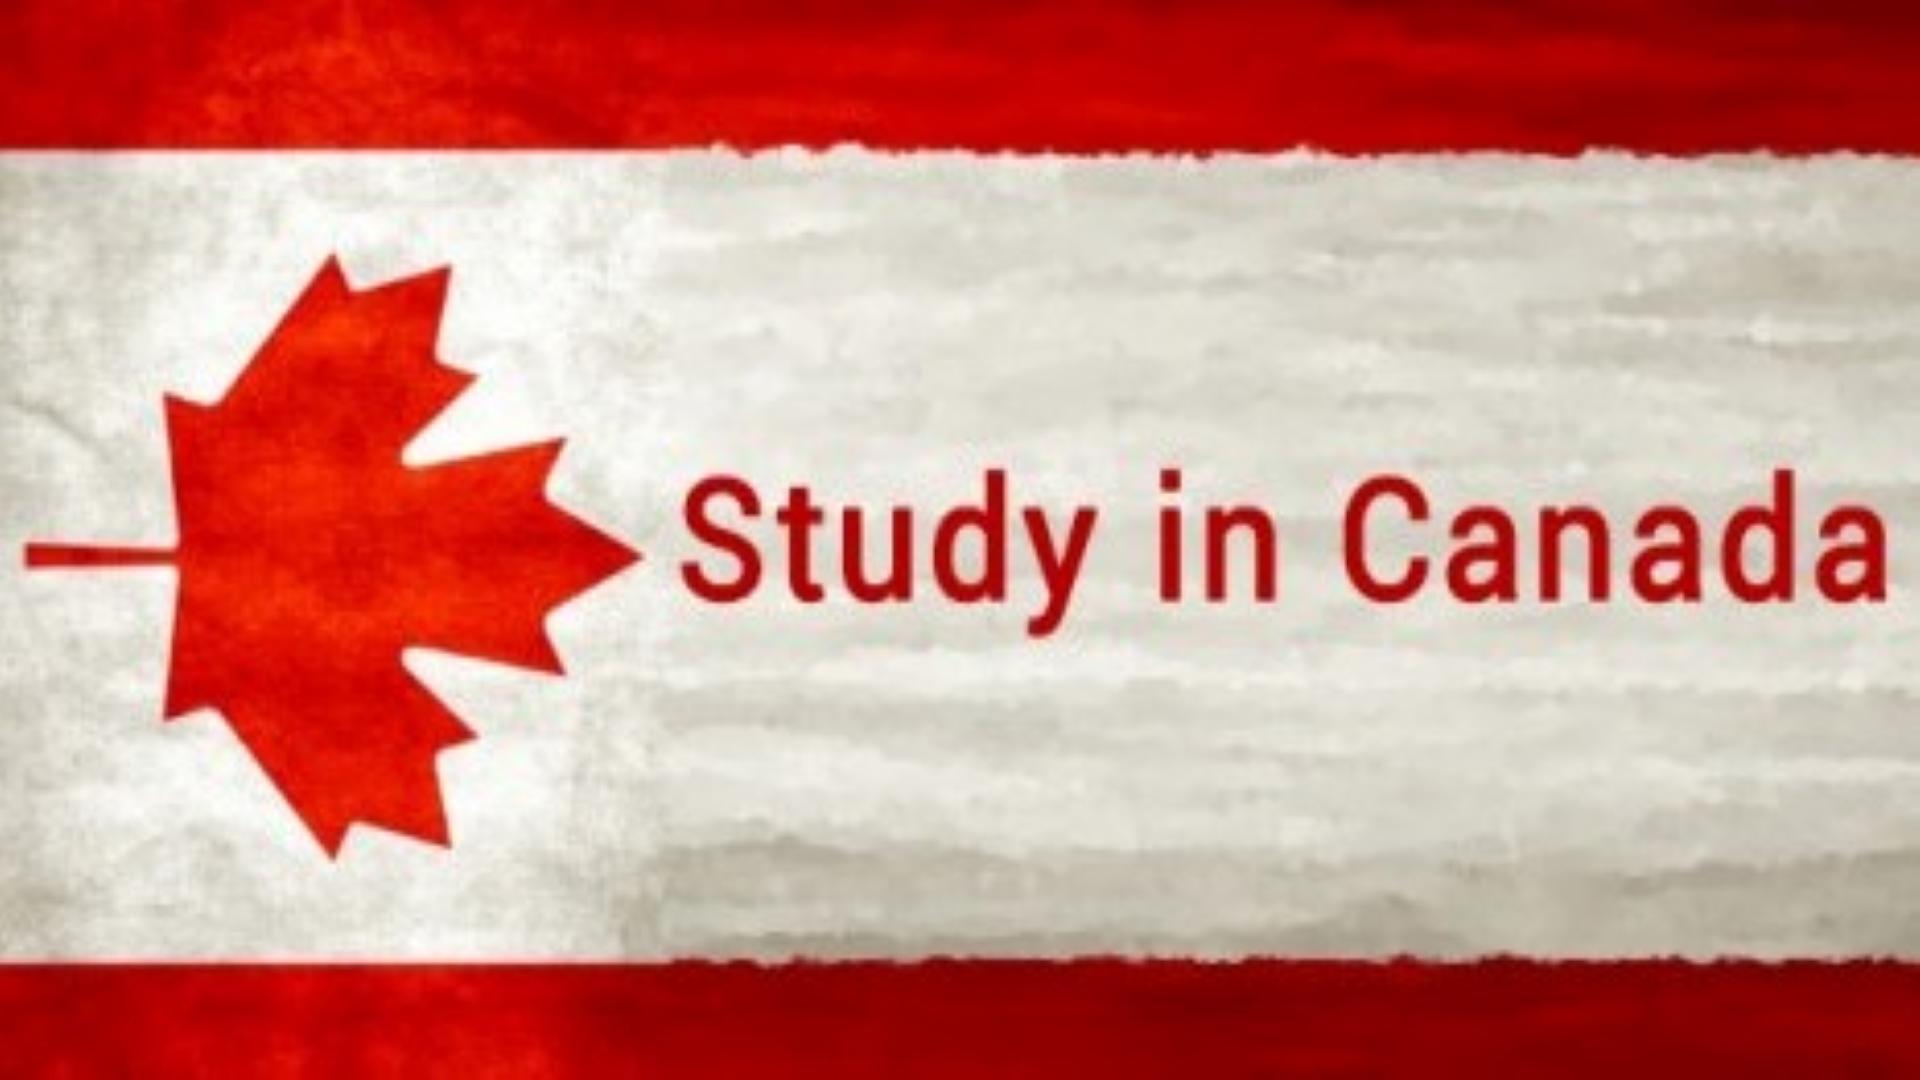 STUDY PERMIT PROCESSING TIMES  FOR APPLICATIONS SUBMITTED OUTSIDE CANADA